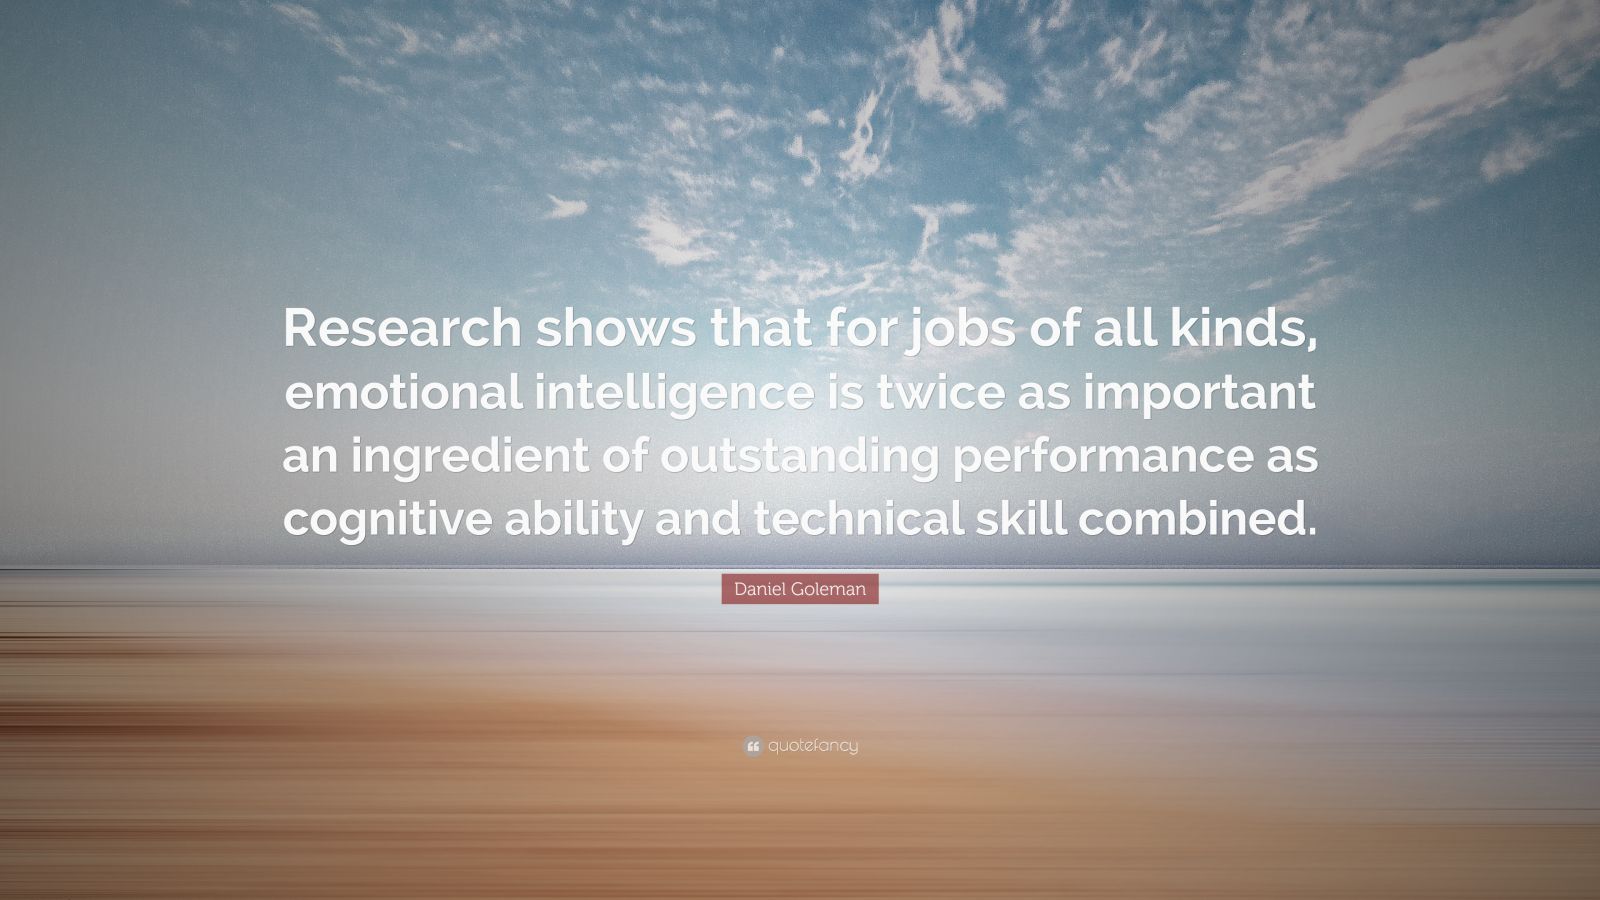 Daniel Goleman Quote “Research shows that for jobs of all